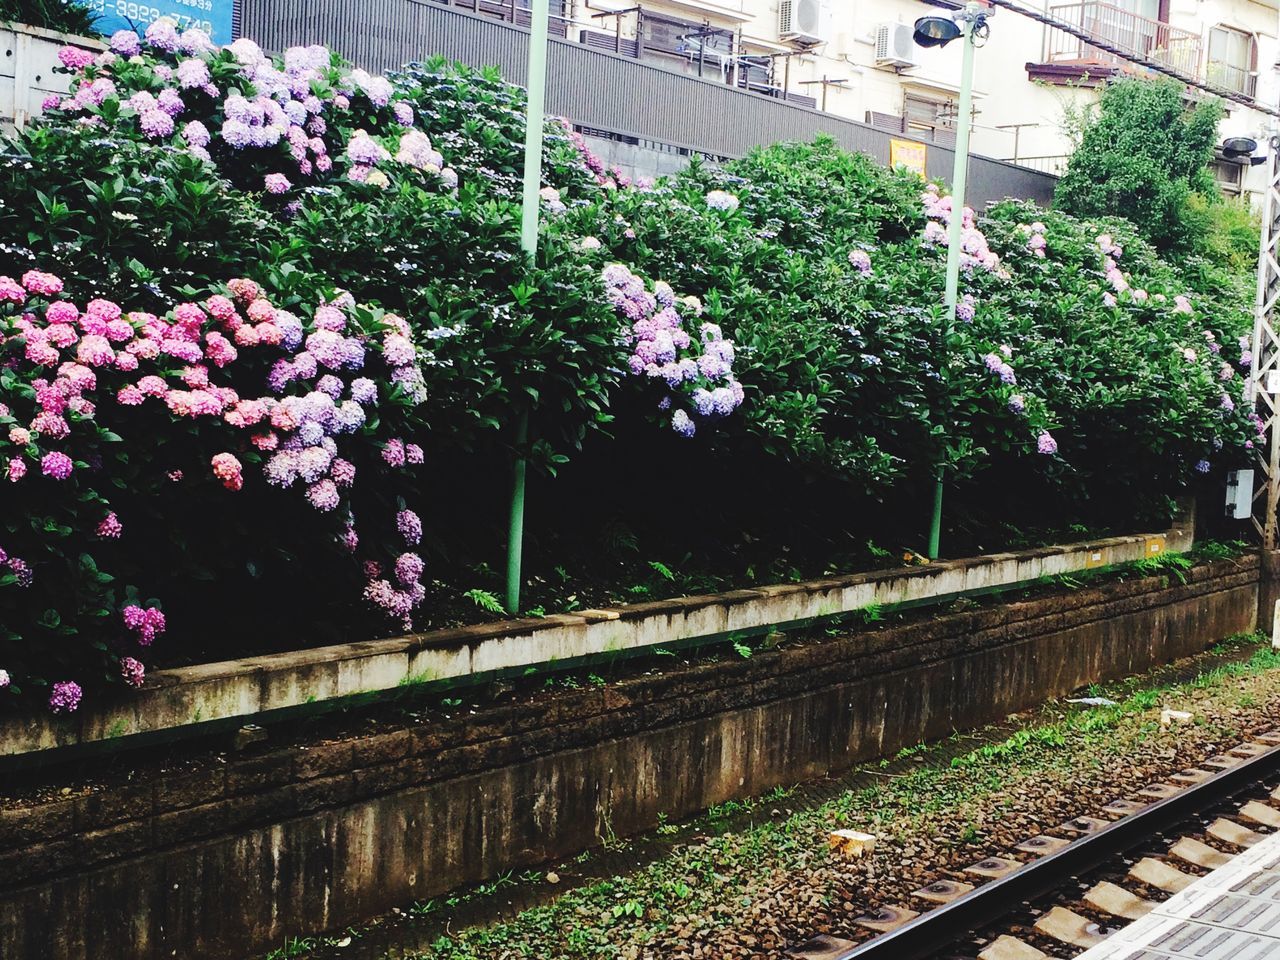 flower, growth, tree, plant, freshness, nature, transportation, beauty in nature, green color, fence, railroad track, outdoors, building exterior, high angle view, day, built structure, railing, no people, in bloom, park - man made space